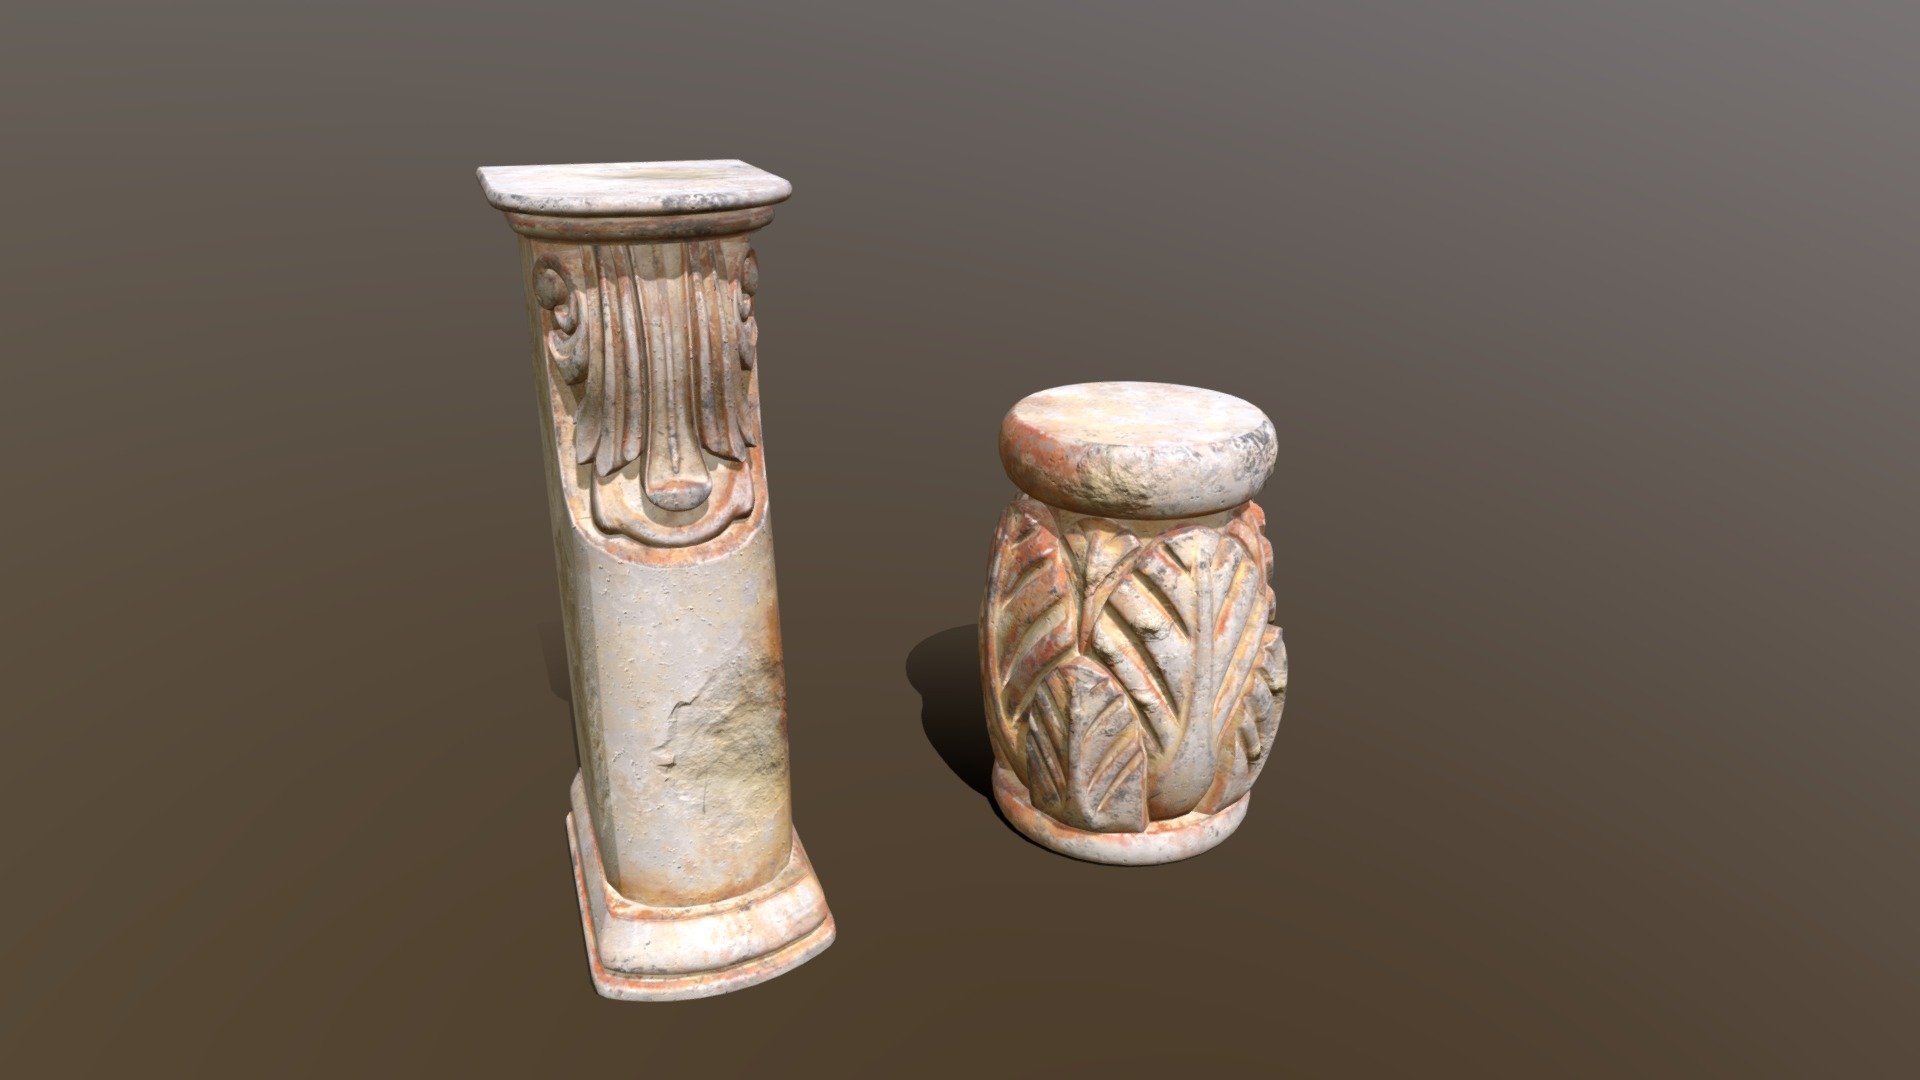 Marble Floral Garden Decoration 3D Model. This model contains the Marble Floral Garden Decoration itself 

All modeled in Maya, textured with Substance Painter.

The model was built to scale and is UV unwrapped properly. Contains a 4K UDIM Texture set. 2 Islands. Udim-1 and Udim-2 

⦁   22885 tris. 

⦁   Contains: .FBX .OBJ and .DAE

⦁   Model has clean topology. No Ngons.

⦁   Built to scale

⦁   Unwrapped UV Map

⦁   4K Texture set

⦁   High quality details

⦁   Based on real life references

⦁   Renders done in Marmoset Toolbag

Polycount: 

Verts 12298

Edges 23858 

Faces 11586

Tris 22885

If you have any questions please feel free to ask me 3d model